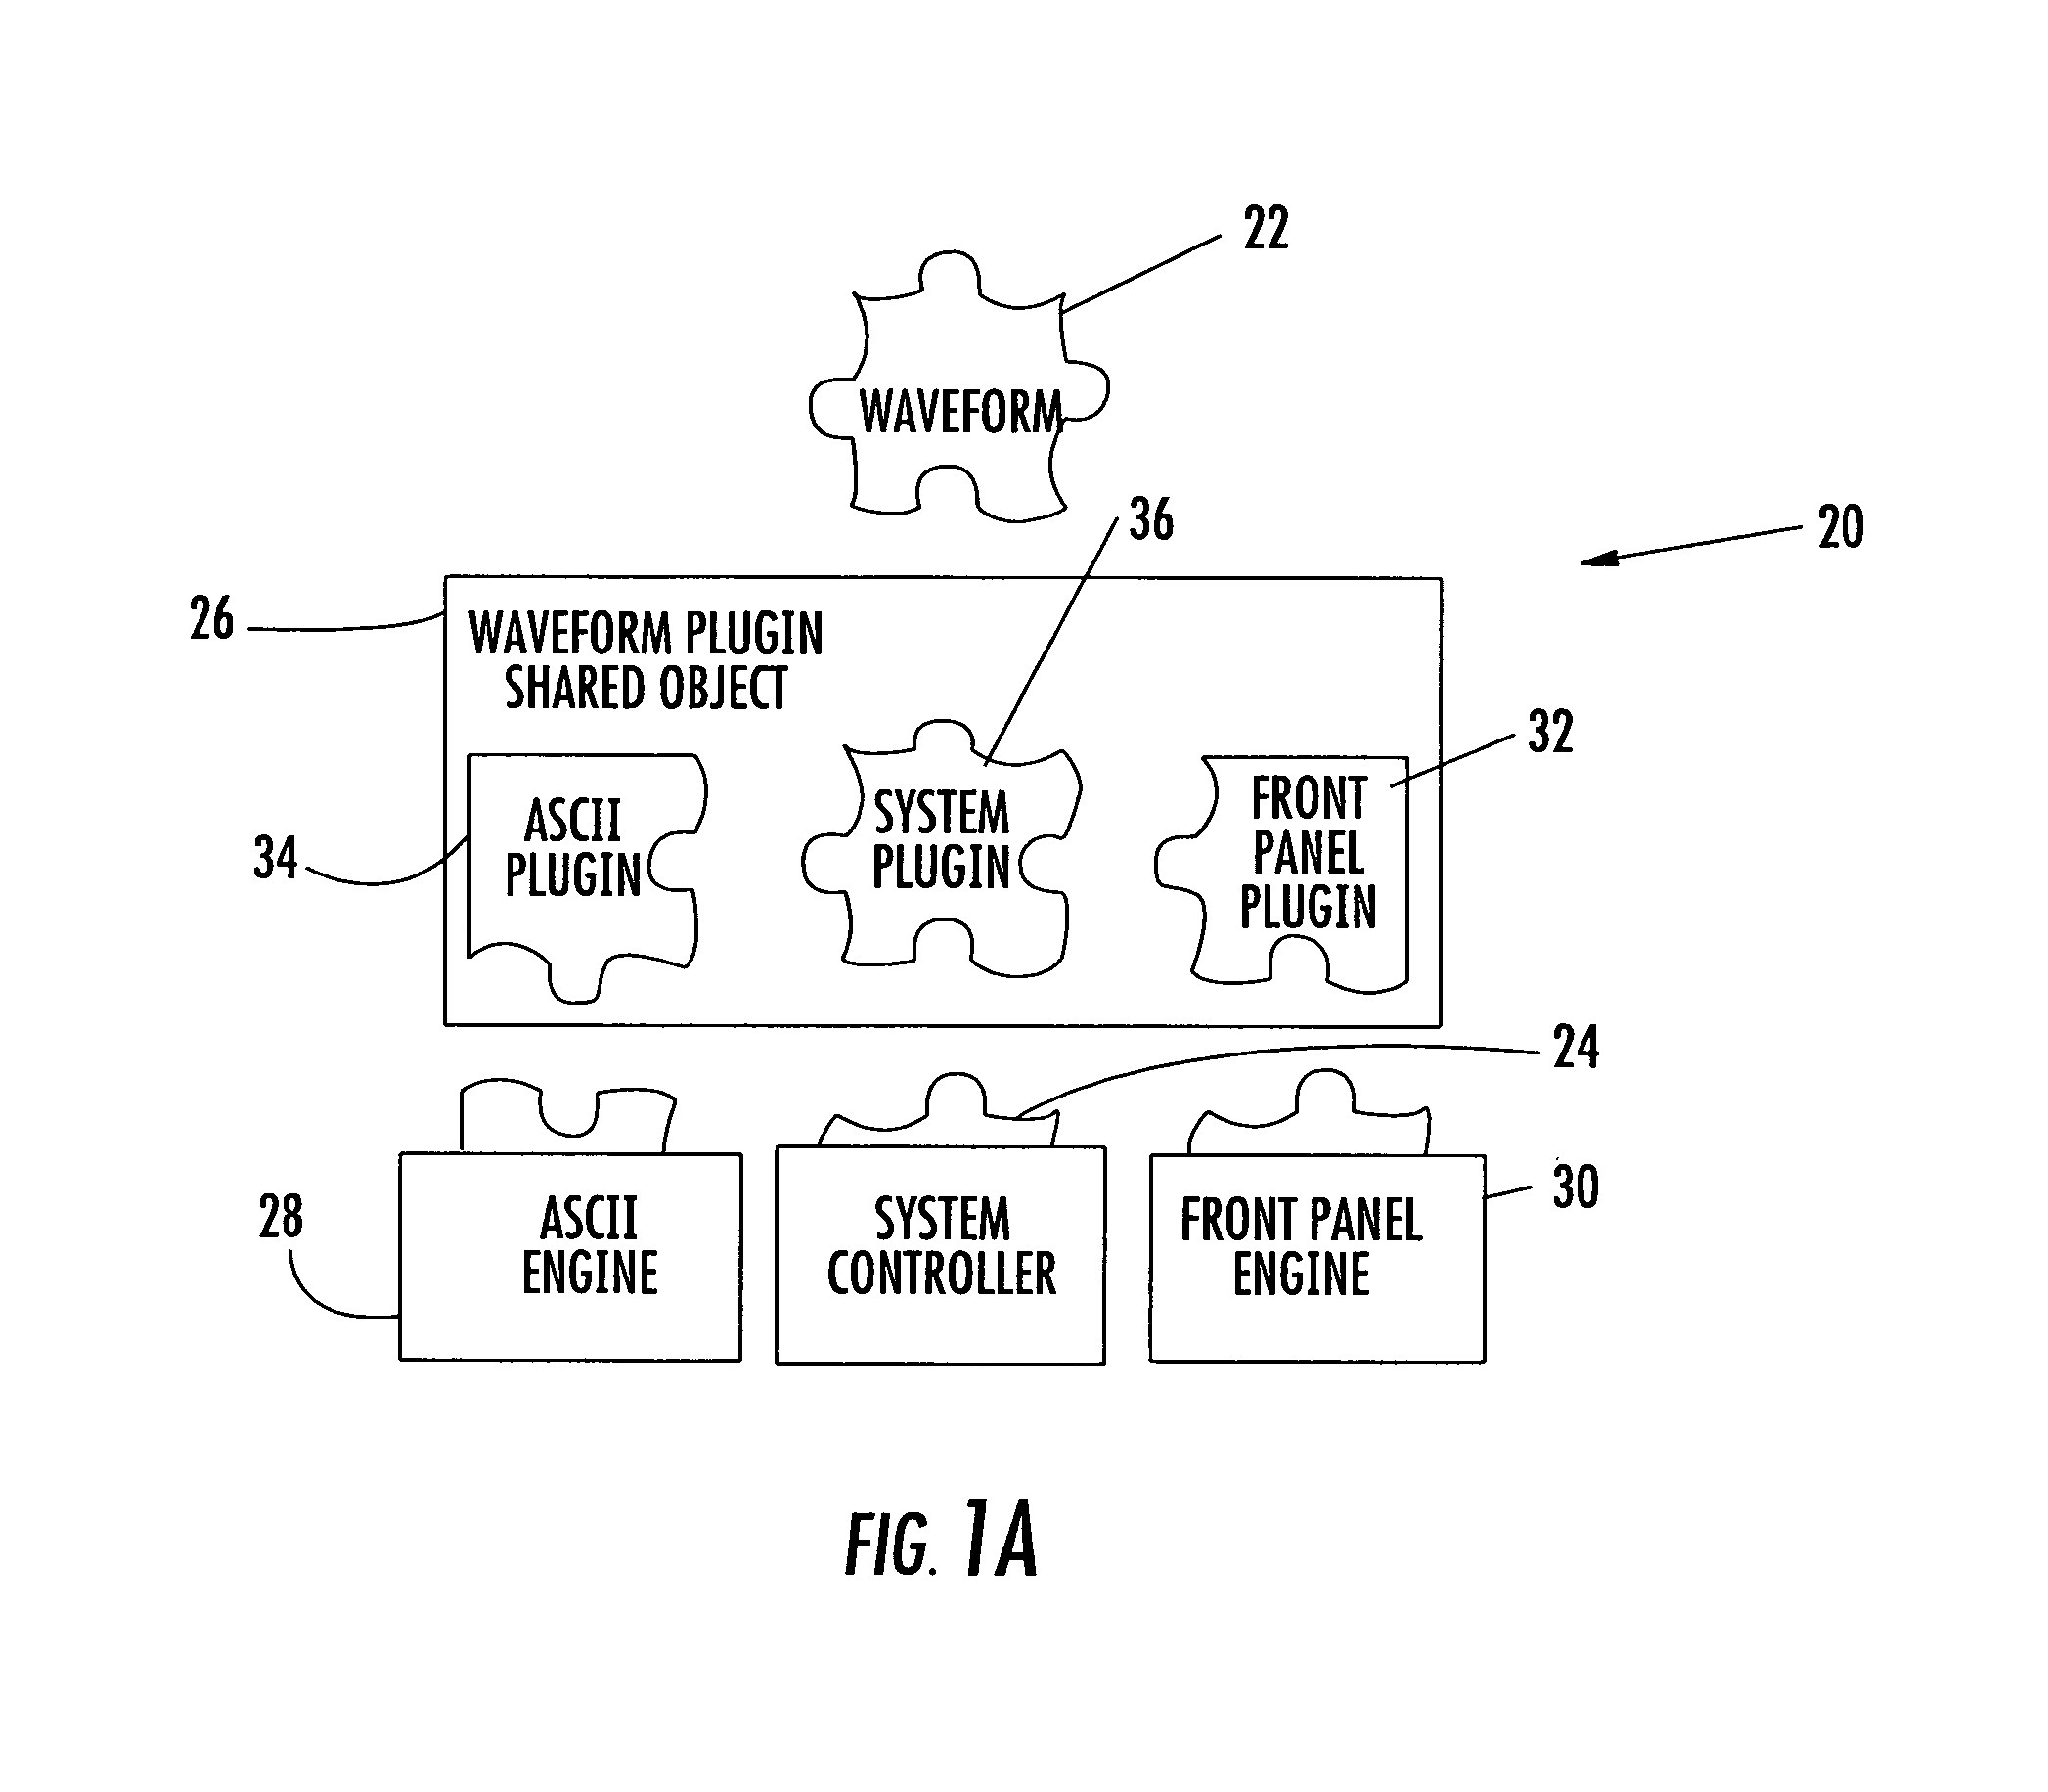 Extensible human machine interface (HMI) plugin architecture for radio software system and related method